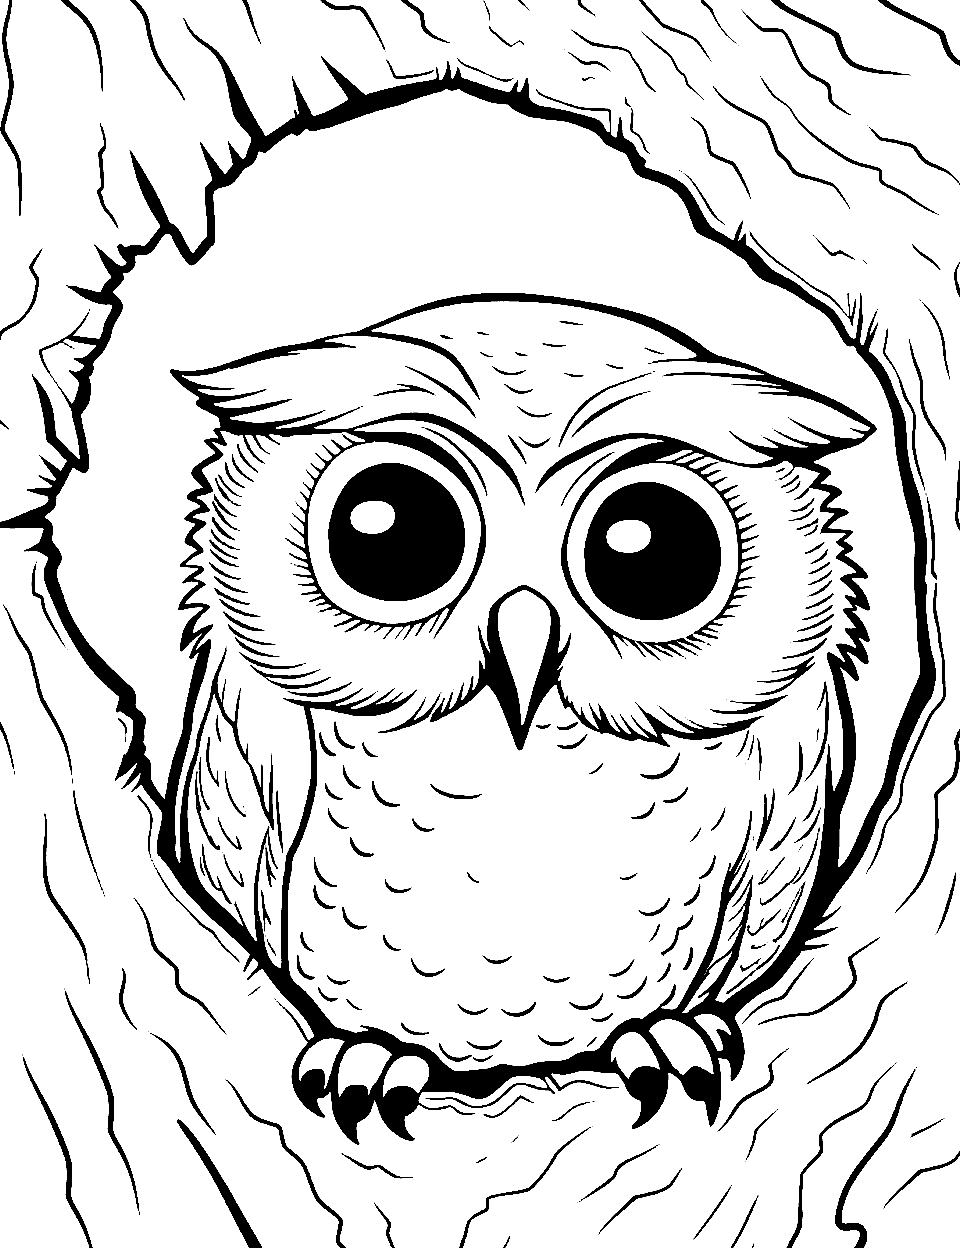 Owl in a Tree Hole Coloring Page - An owl peeking out from a hole in a tree.